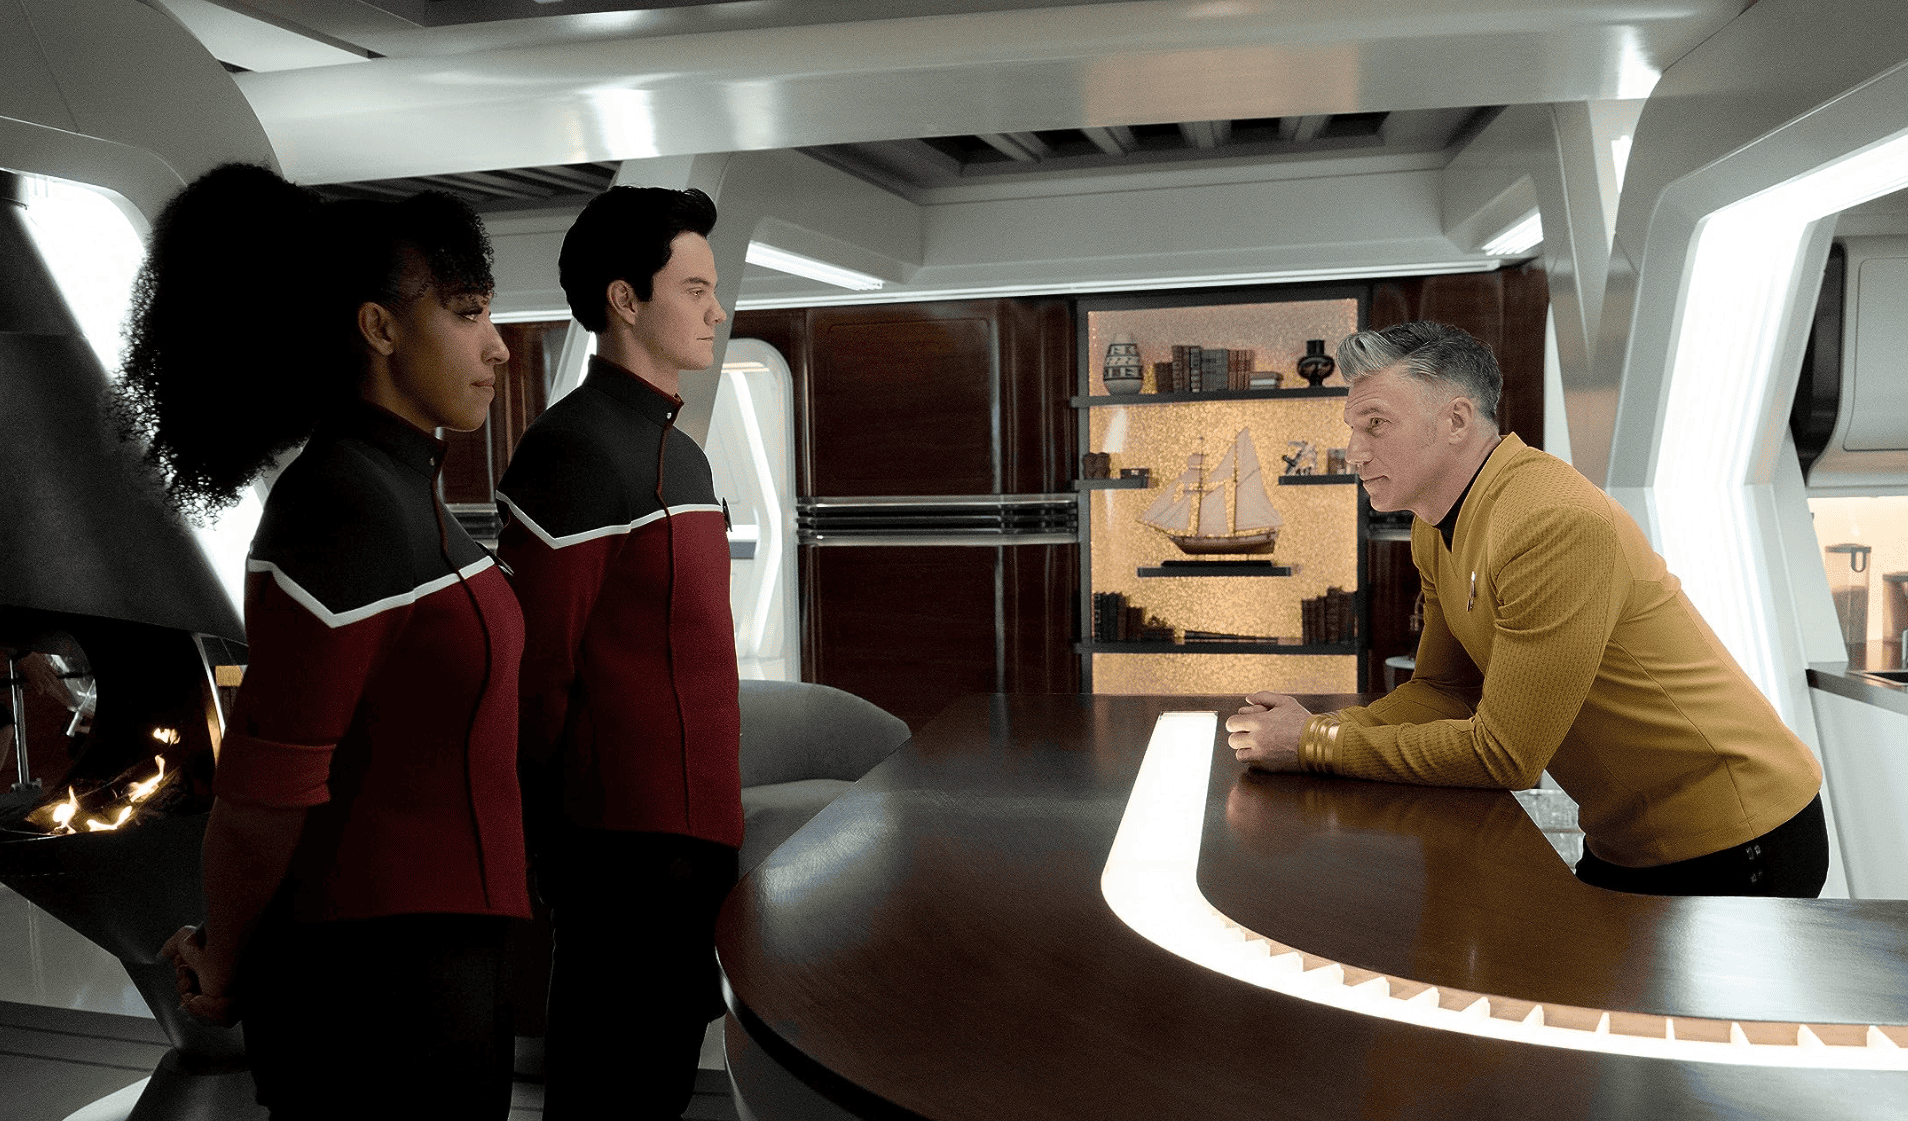  A pair of members of a spaceship get talked to by the ship's captain in this image from CBS Studios.